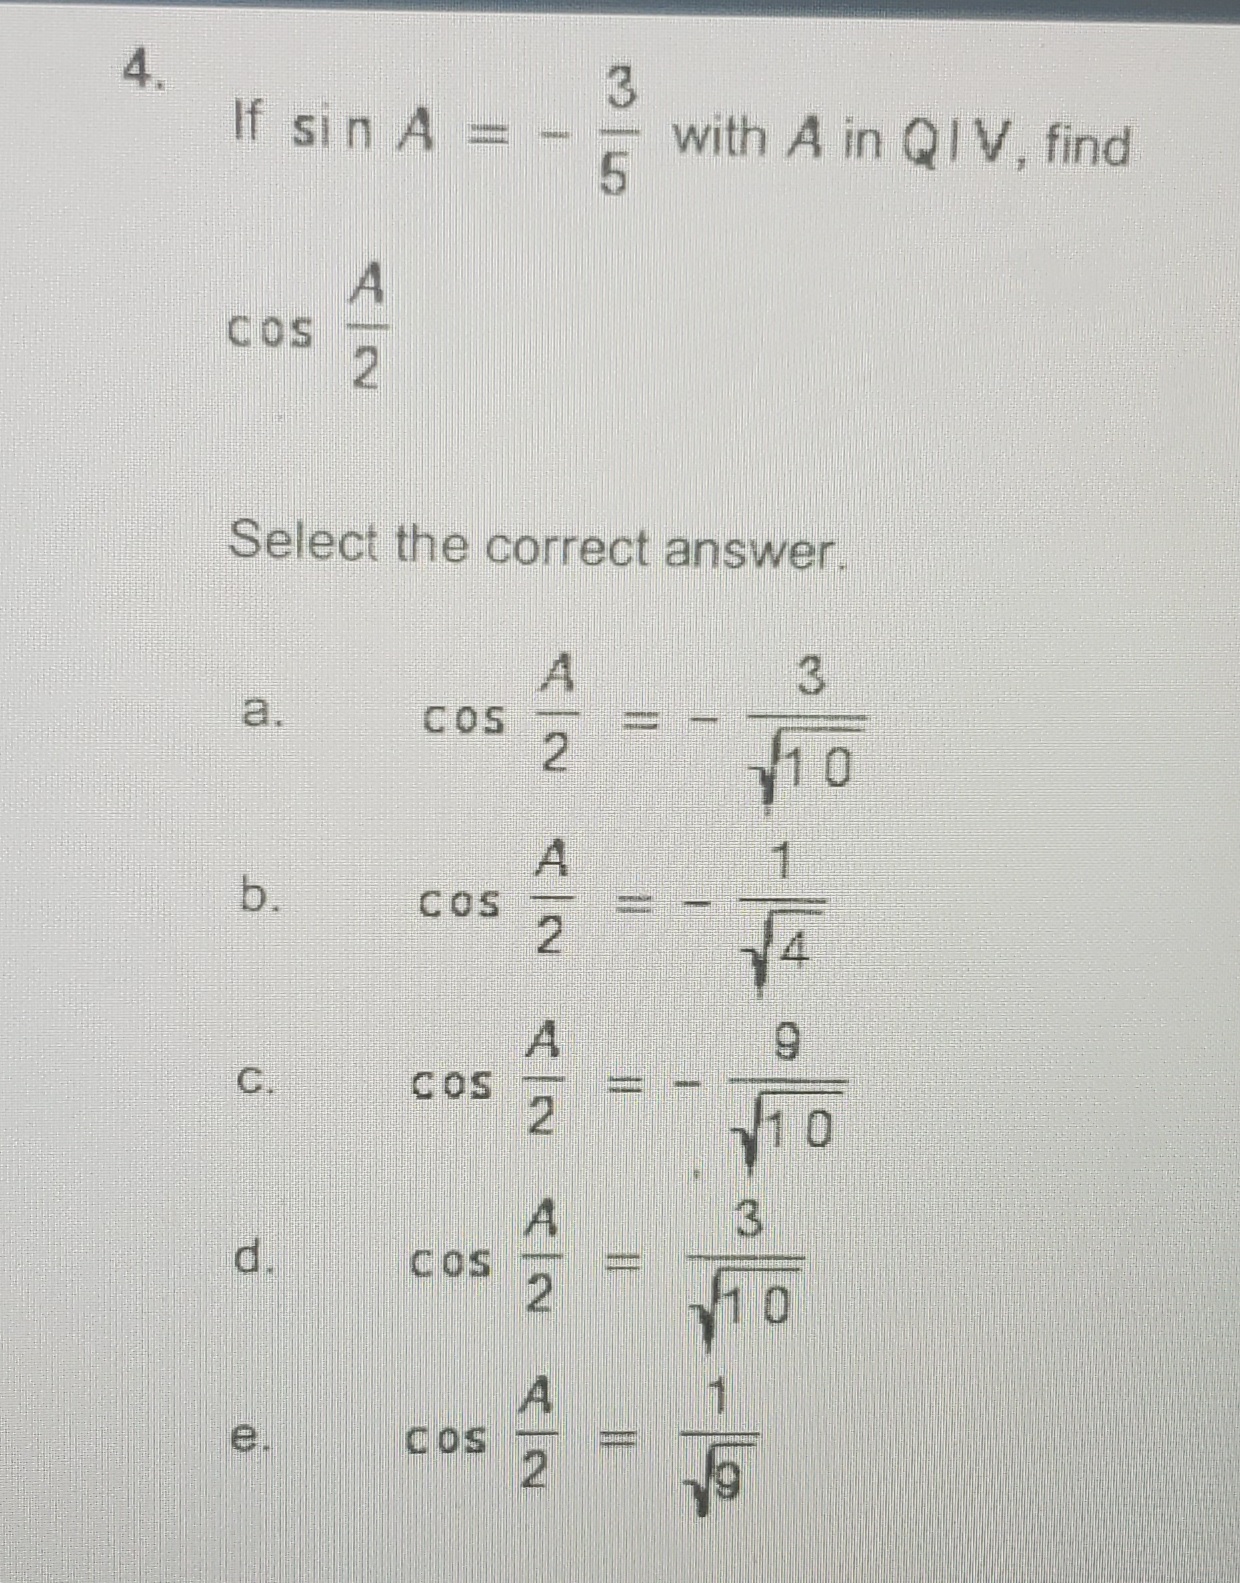 4.
If sin A
with A in QIV, find
COS
Select the correct answer.
a.
COS
b.
COS
C.
COS
d.
COS
e.
COS
of
|3|
A/2
A/2
A/2
